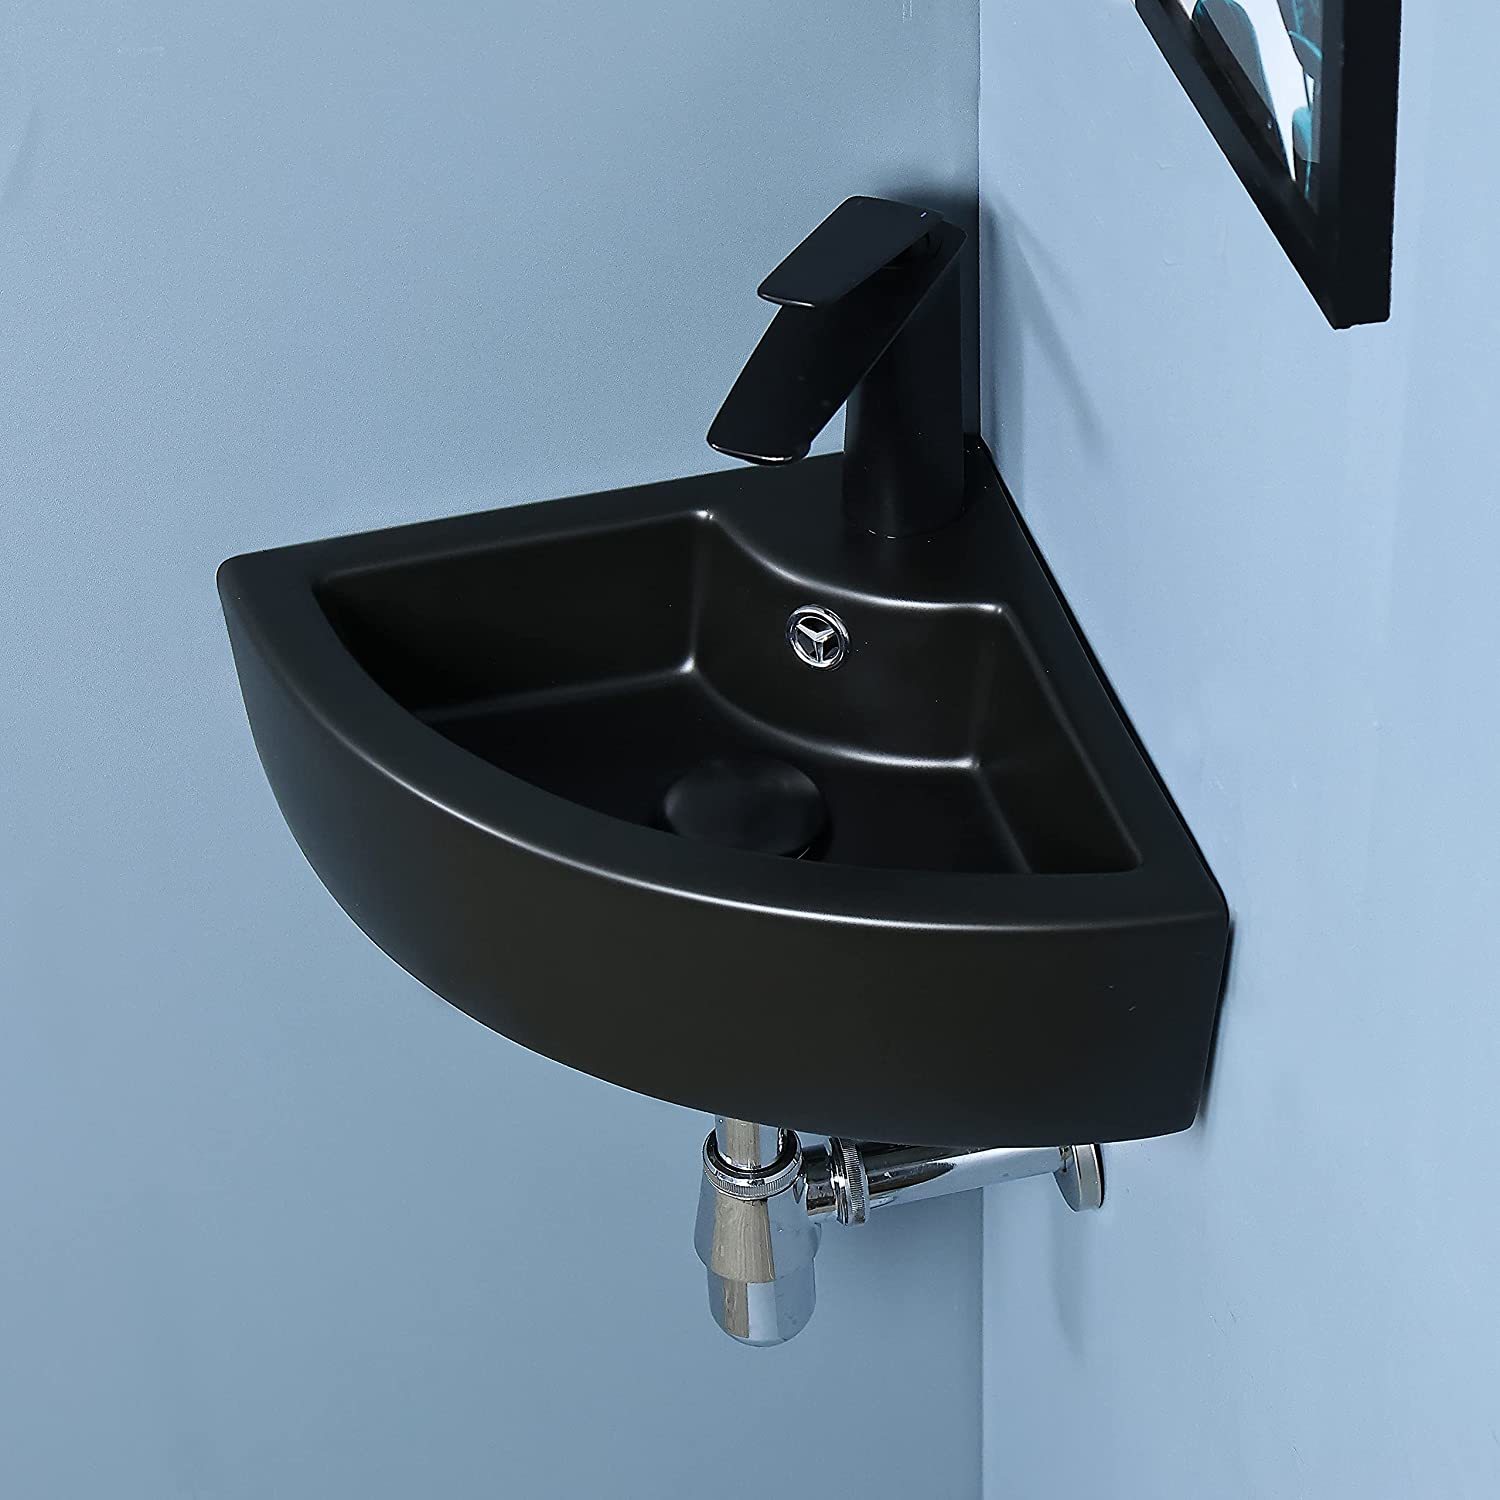 Primary image for Bathivy Bathroom Corner Sink Small Wall Mount Sink Wall Hung Basin, Matte Black